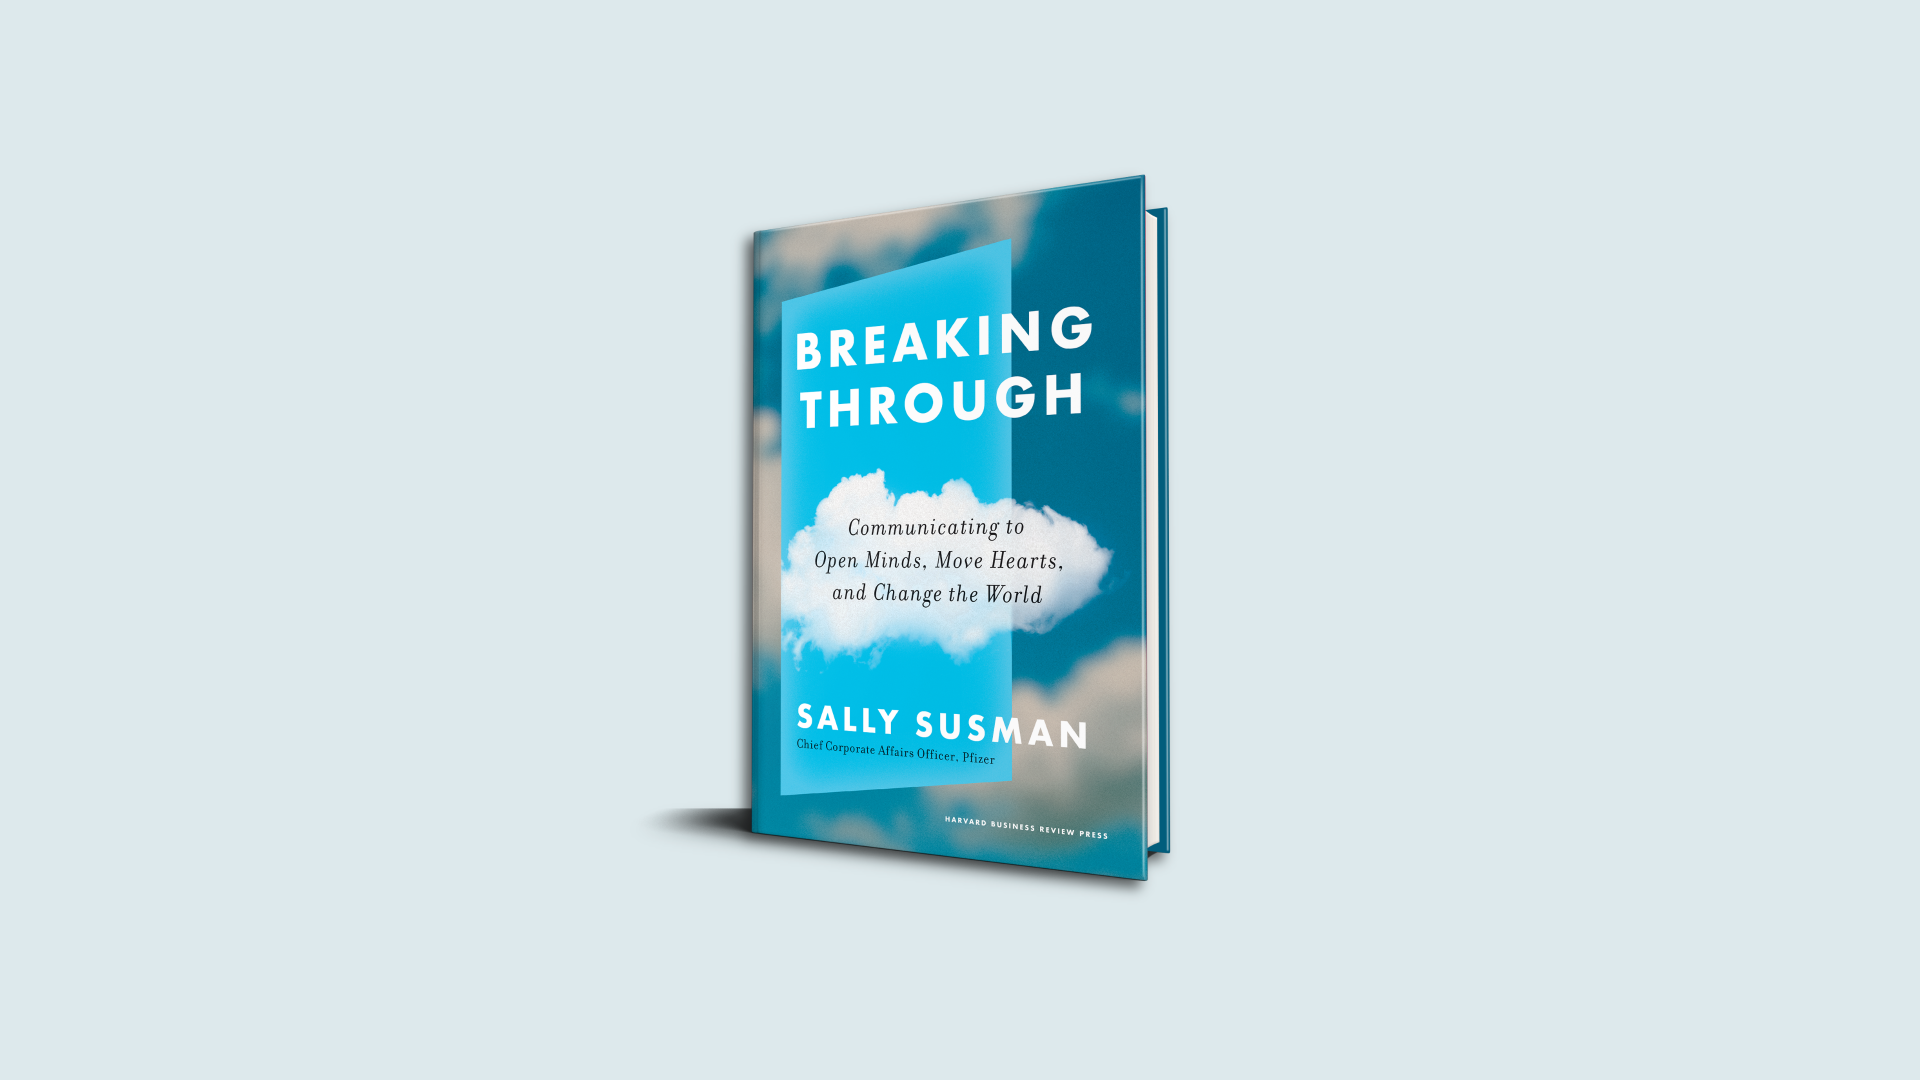 "Breaking Through" by Sally Susman, Pfizer's chief corporate affairs officer. Credit: Harvard Business Review Press.